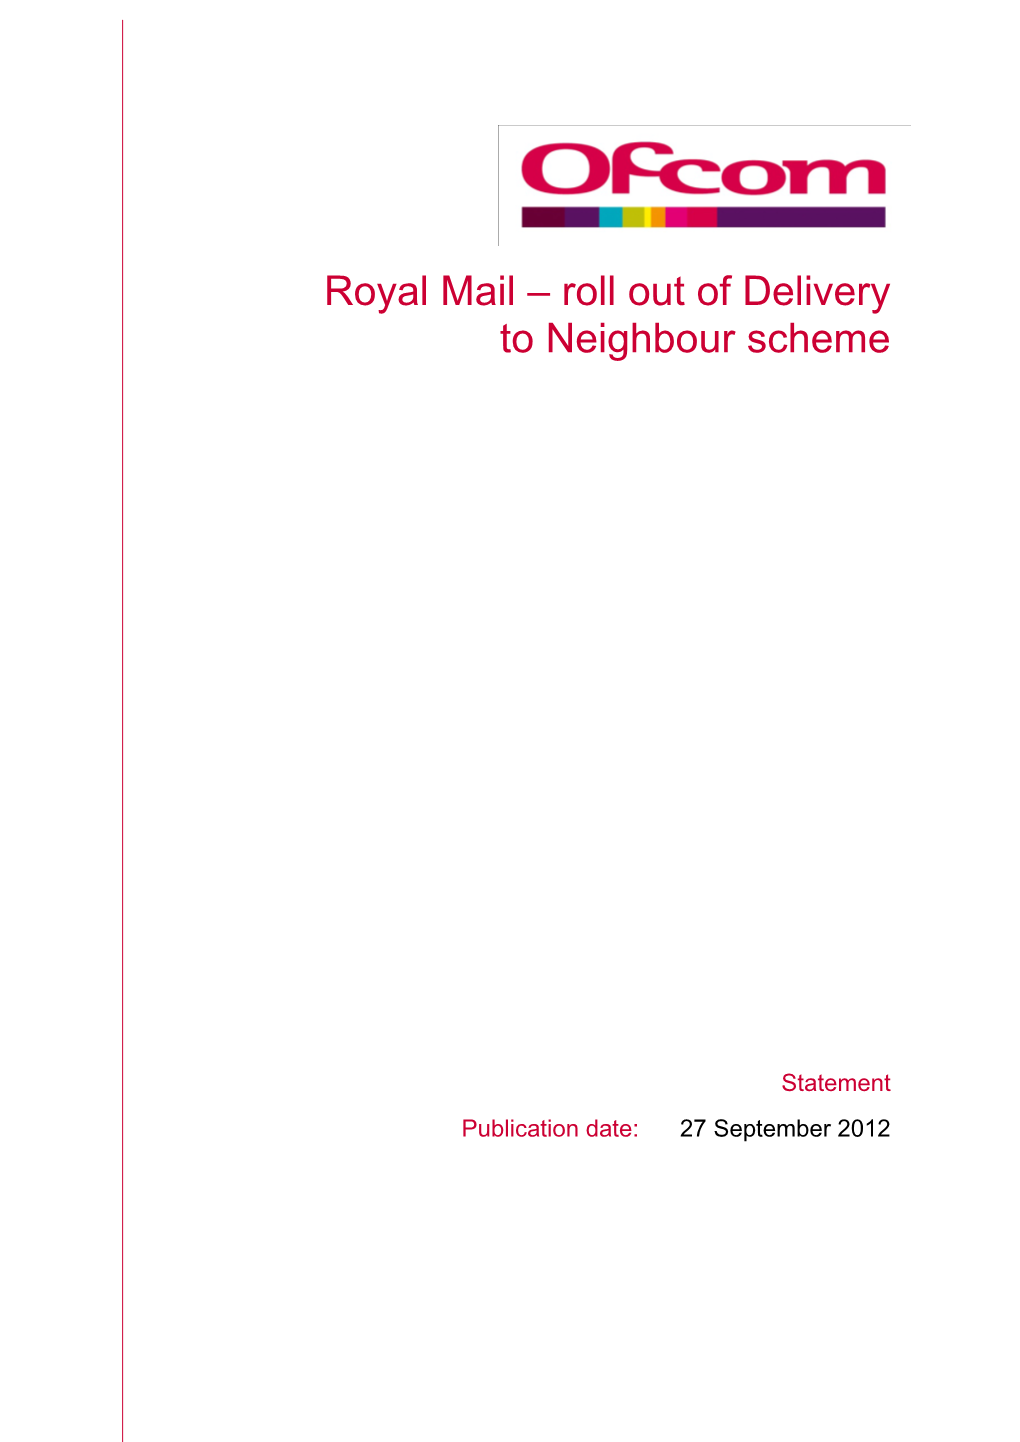 Royal Mail – Roll out of Delivery to Neighbour Scheme